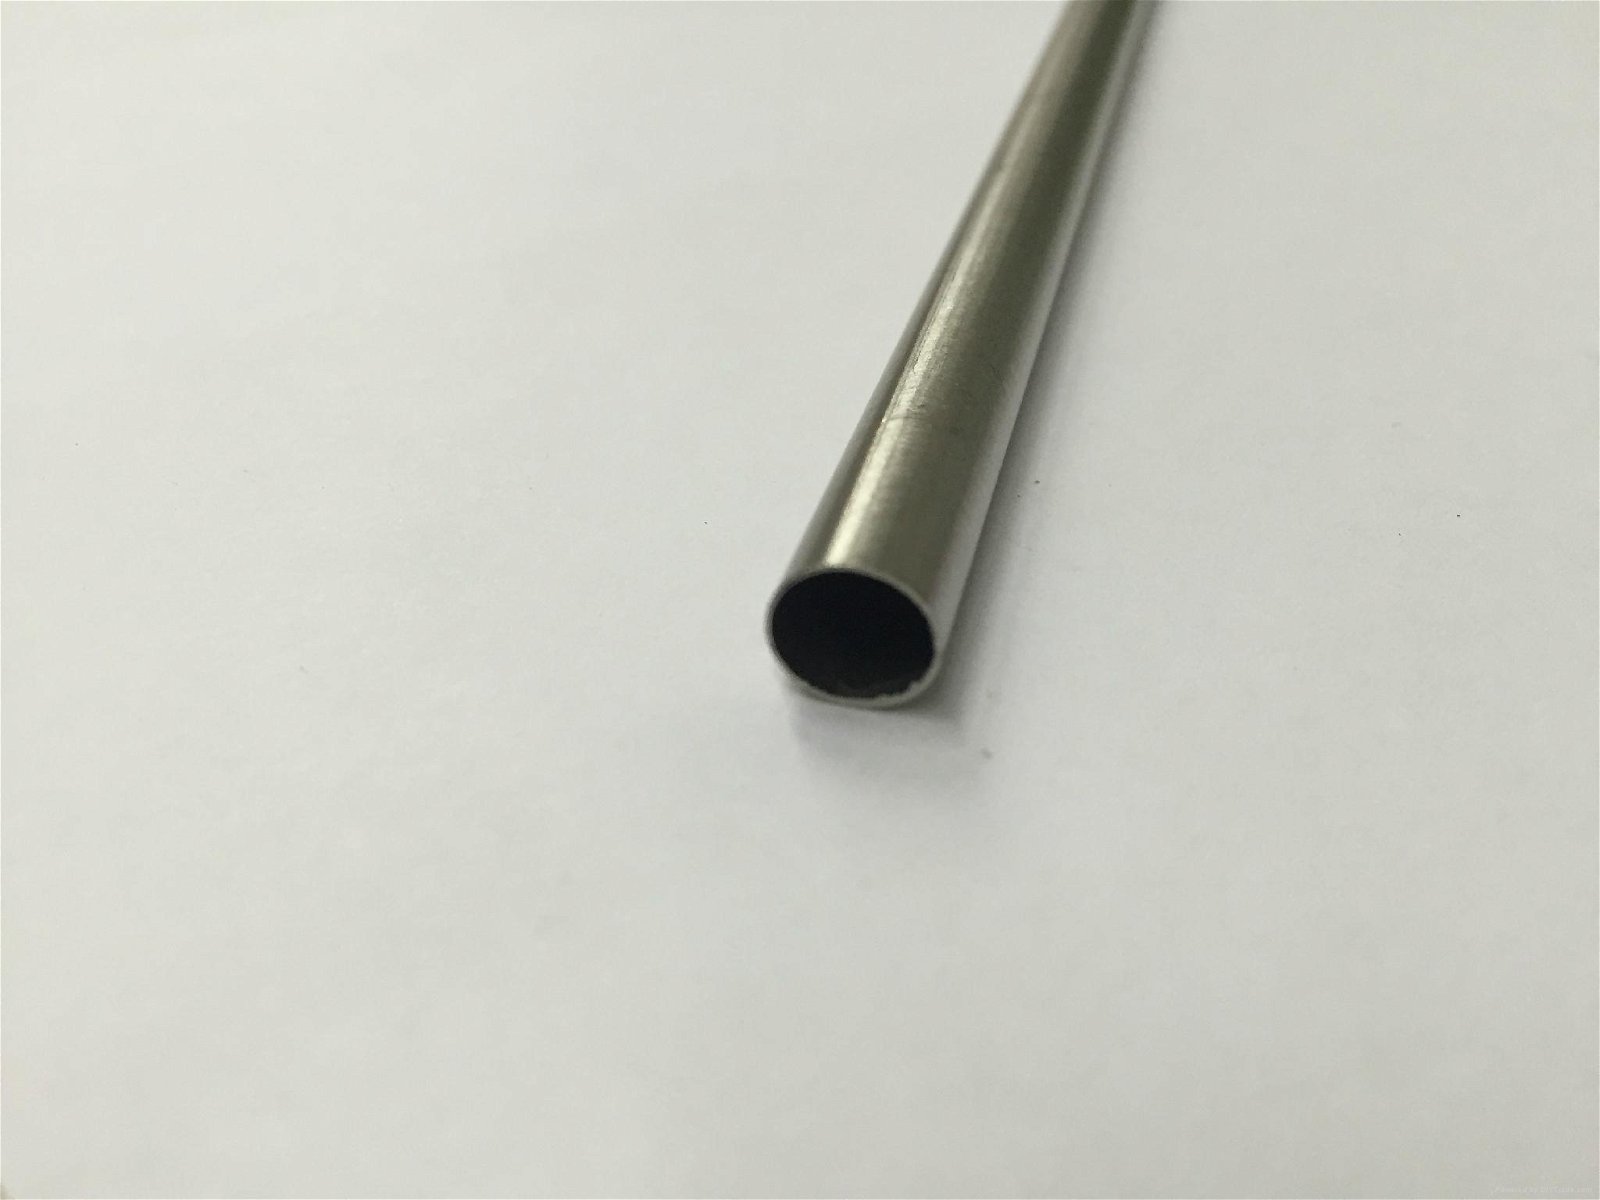 Alibaba wounderful pipe supplier 316L tubos 1.5mm*0.2mm pipes 5